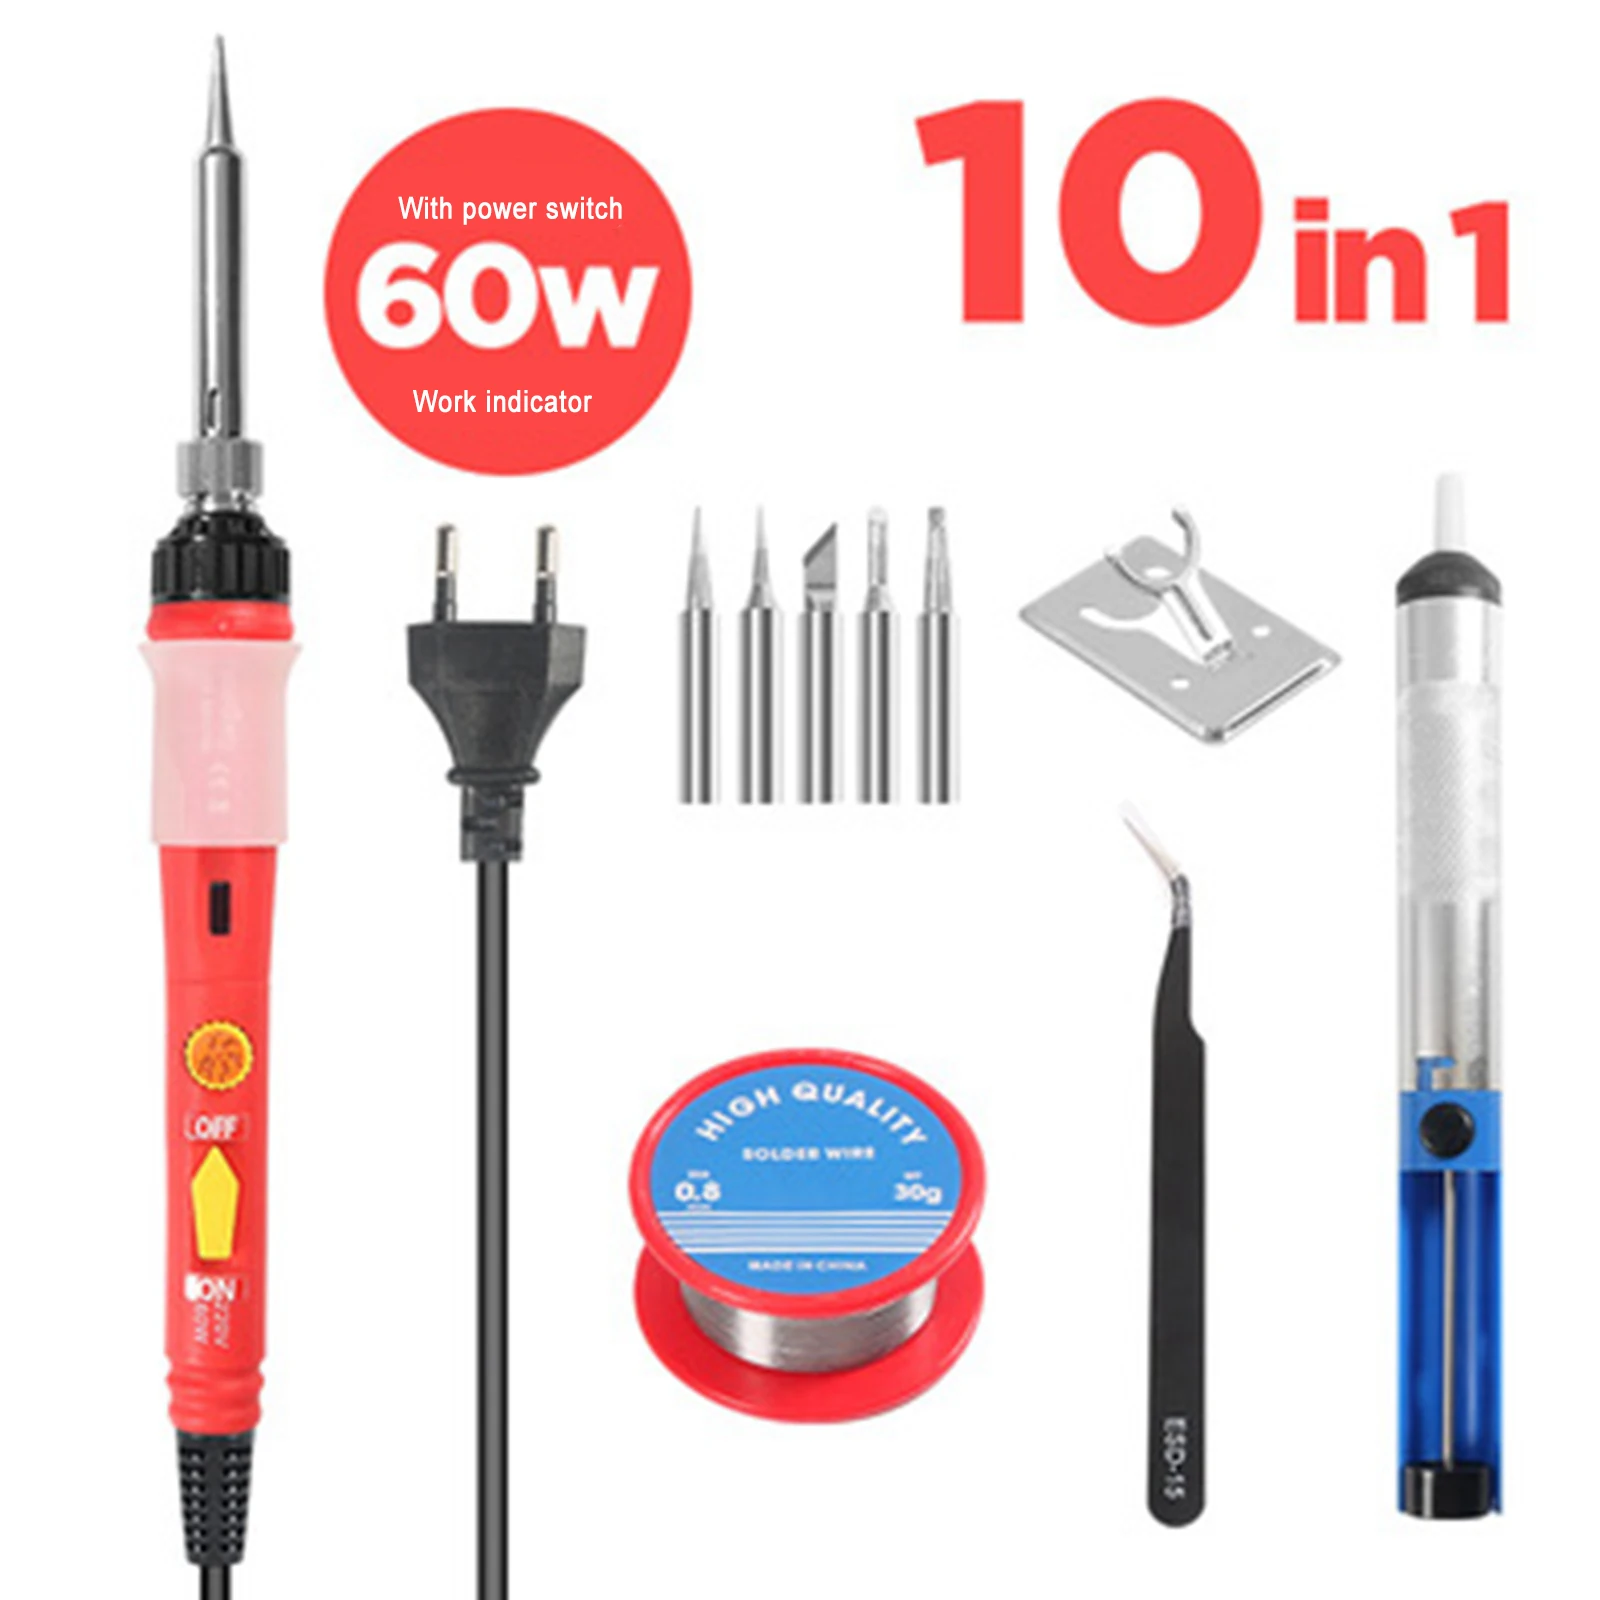 

110V/220V Electric Soldering Iron Kit Set Adjustable Temperature 60W Professional Soldering Irons Welding Tool with Solder Wire